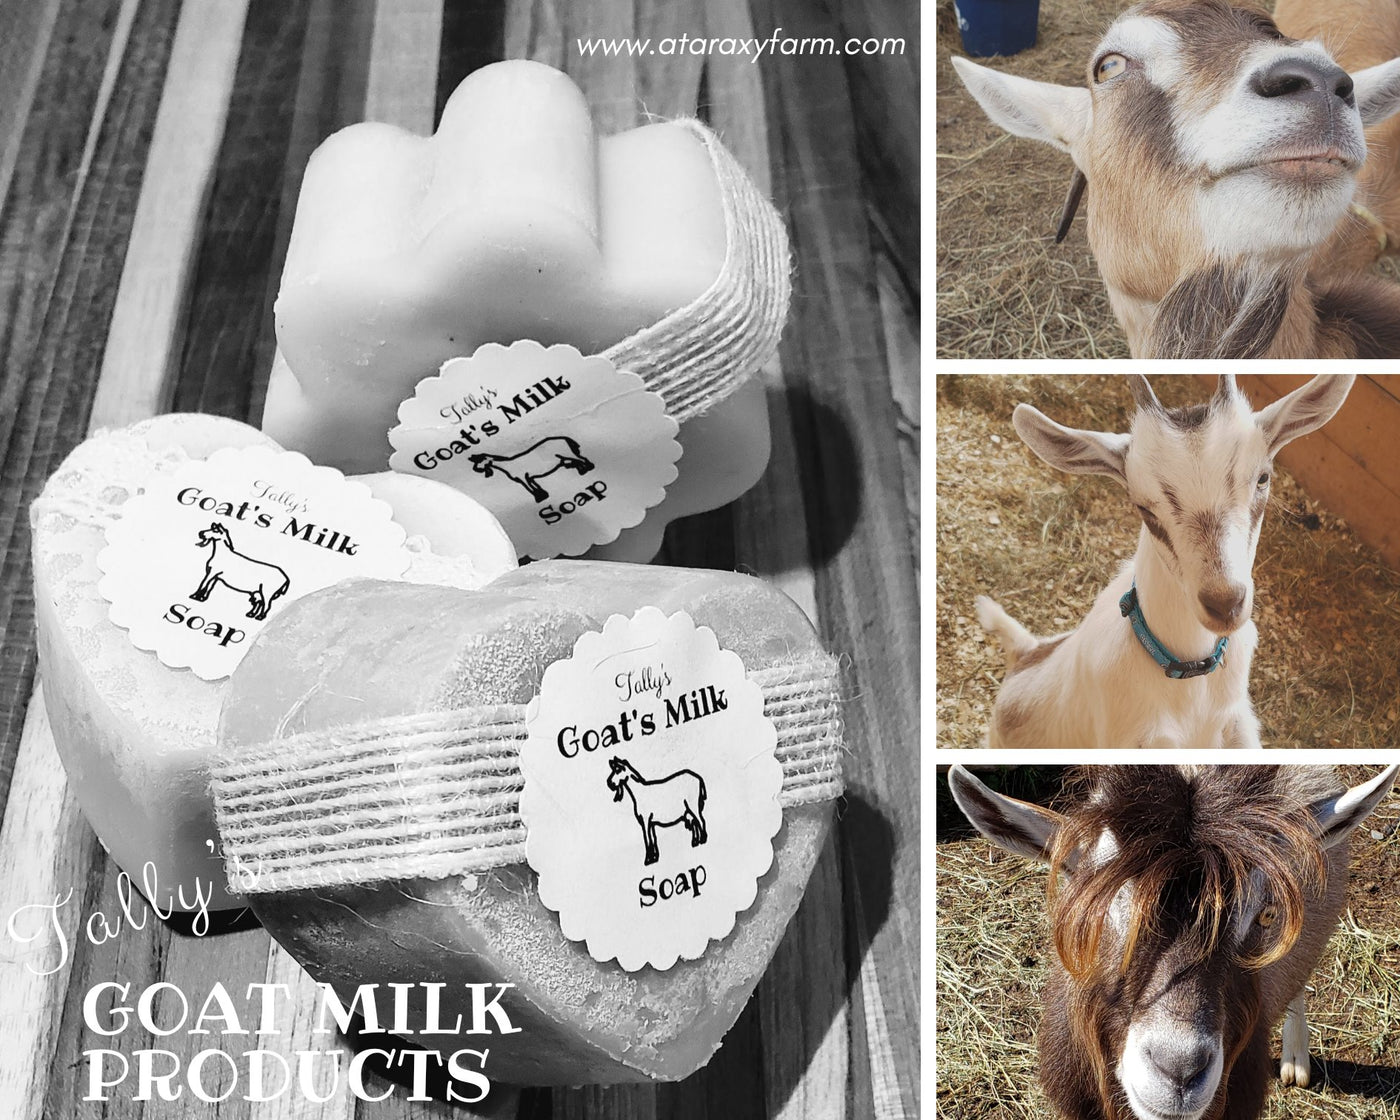 Tally's Goat Milk Products